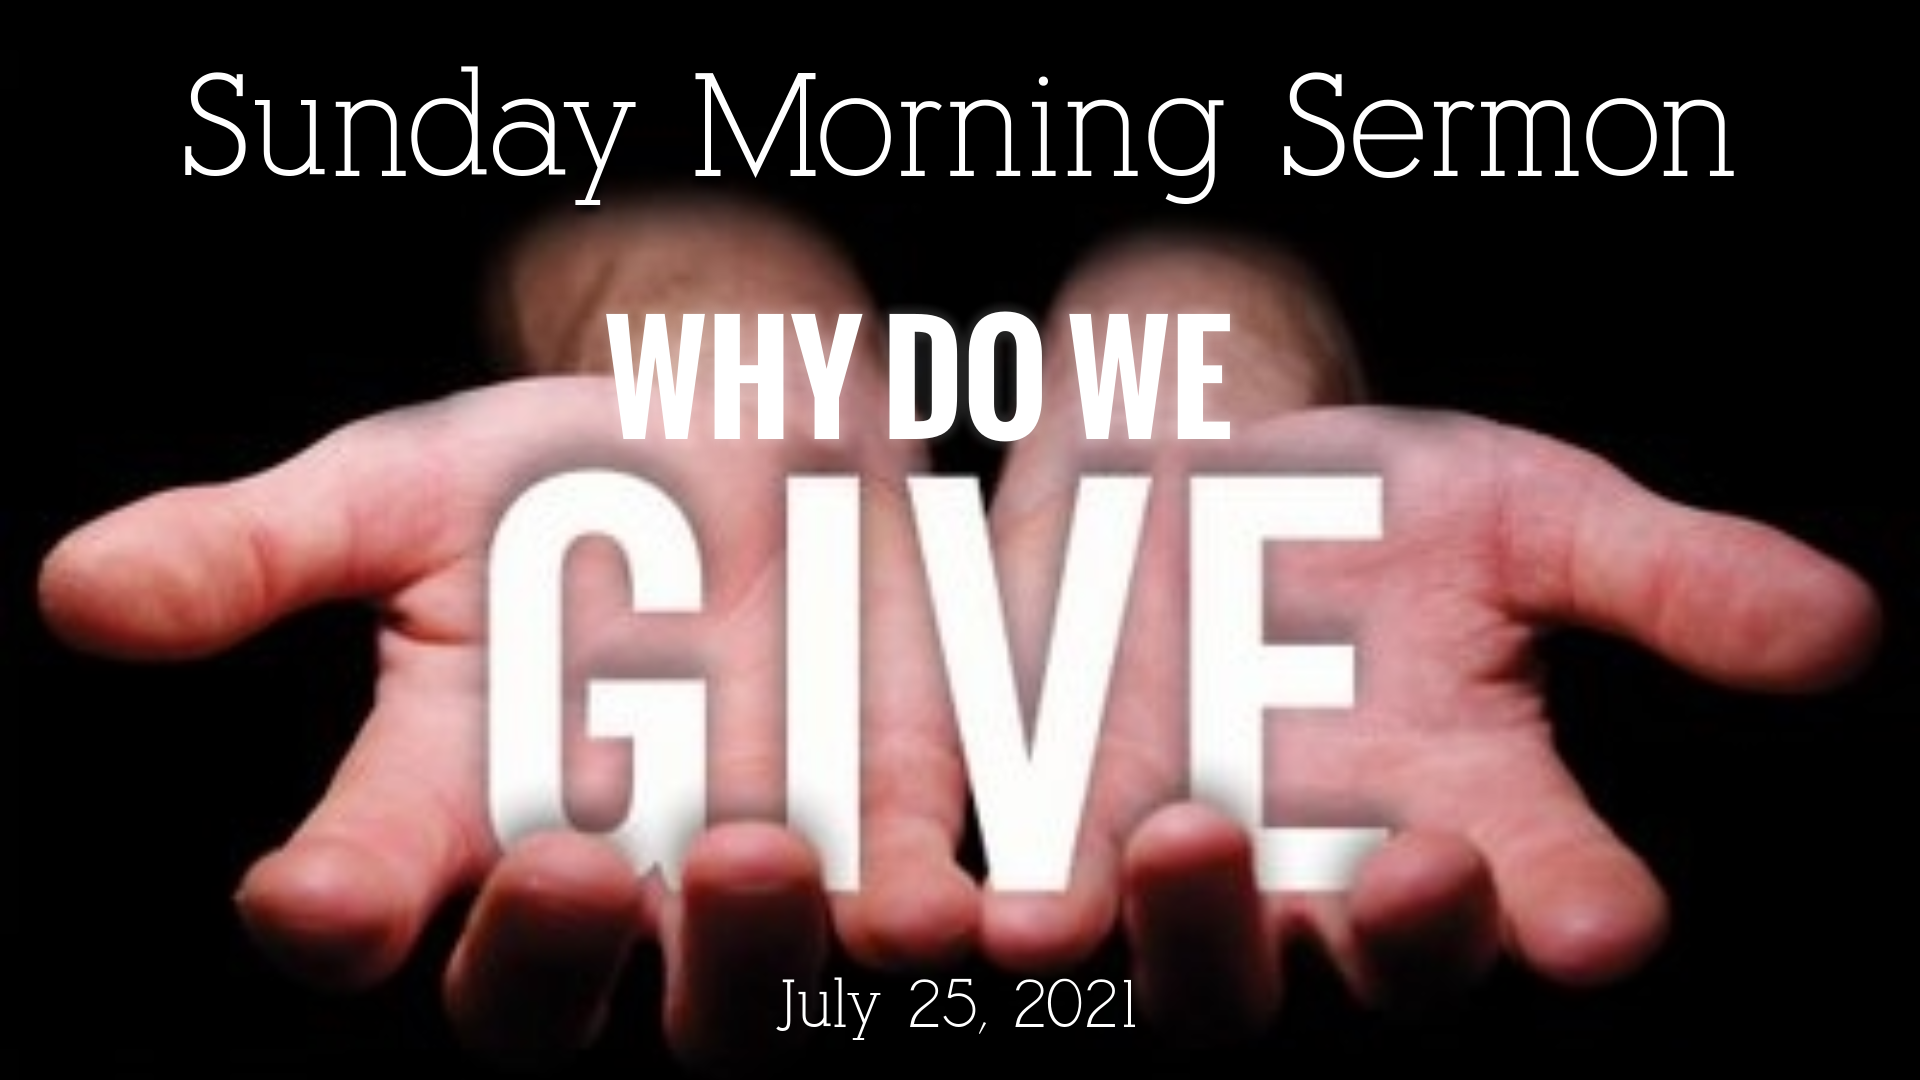 Why Do We Give?